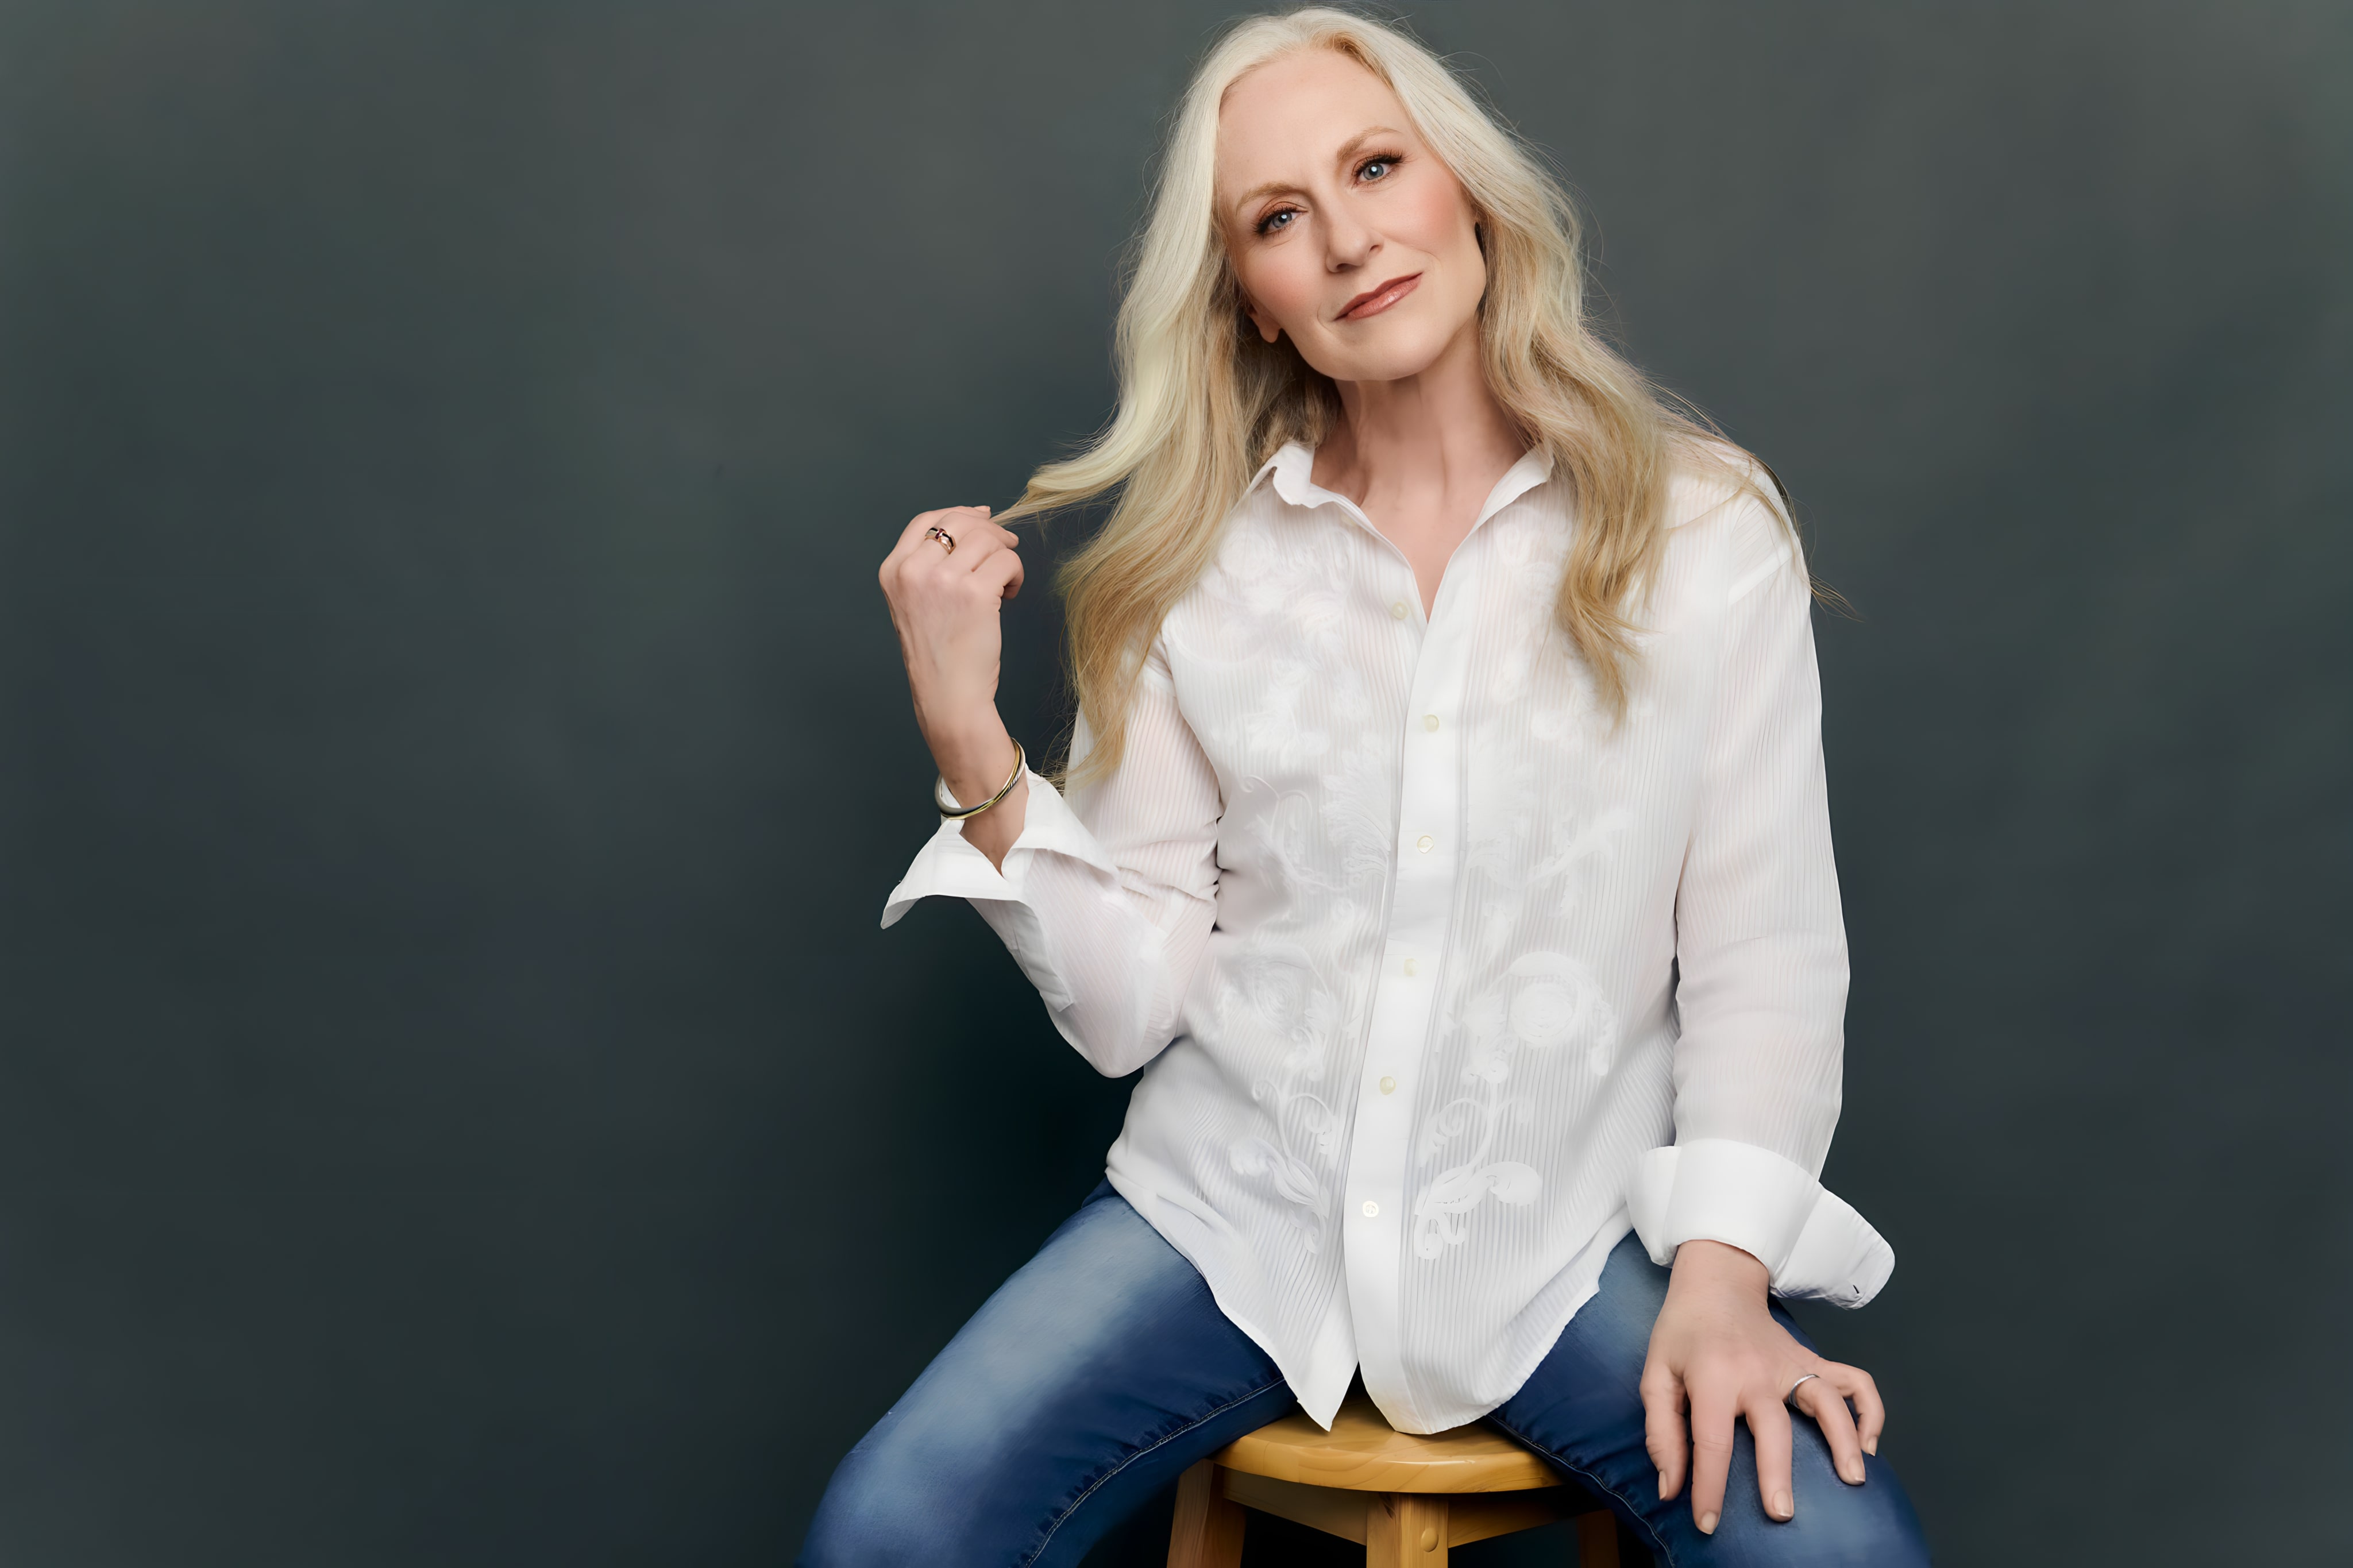 Woman in white shirt and jeans sitting on wooden stool